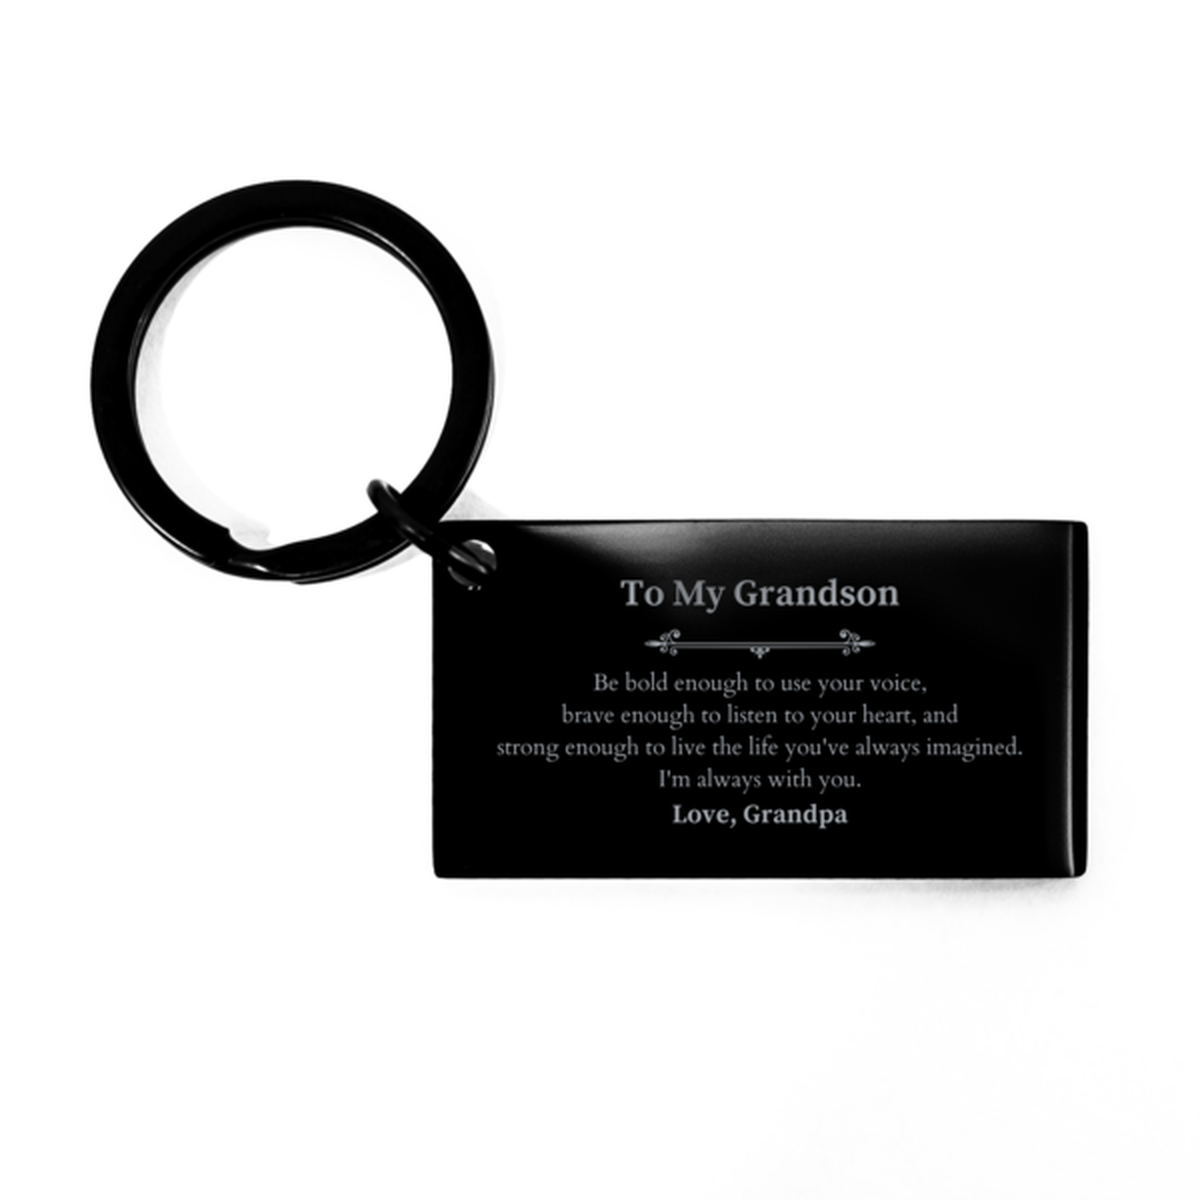 Keepsake Grandson Keychain Gift Idea Graduation Christmas Birthday Grandson from Grandpa, Grandson Be bold enough to use your voice, brave enough to listen to your heart. Love, Grandpa